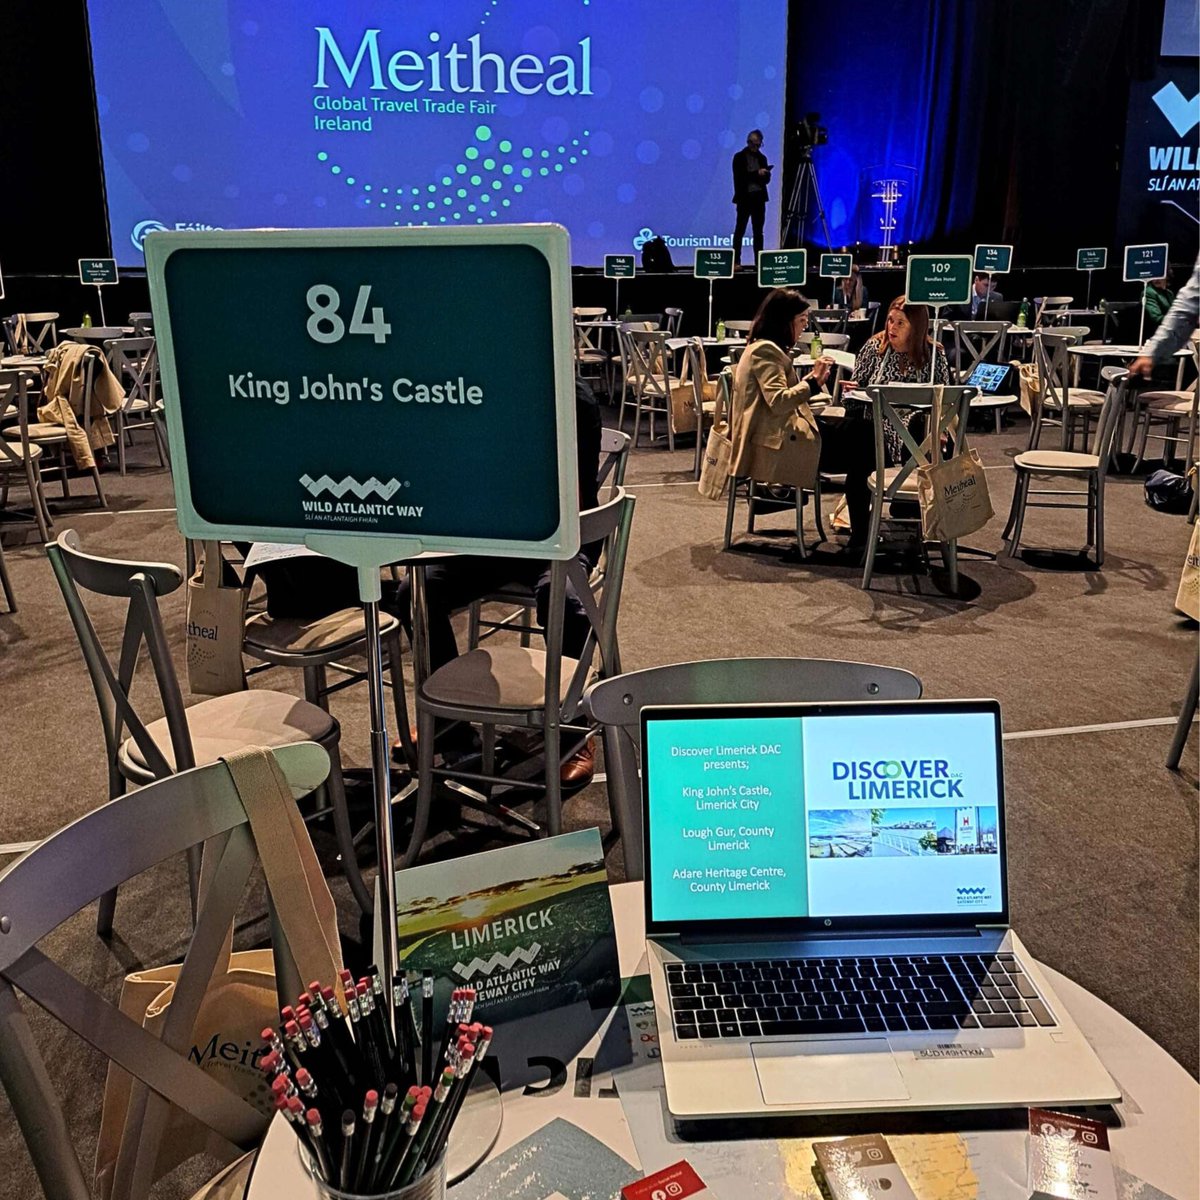 We're delighted to attend #Meitheal2024 – the Global Travel Trade Fair Ireland, happening now in Killarney.

Stop by table 84 to meet Mary Kelly, our Sales and Marketing Manager, and learn more about our standout visitor attractions. We'd love to see you there!